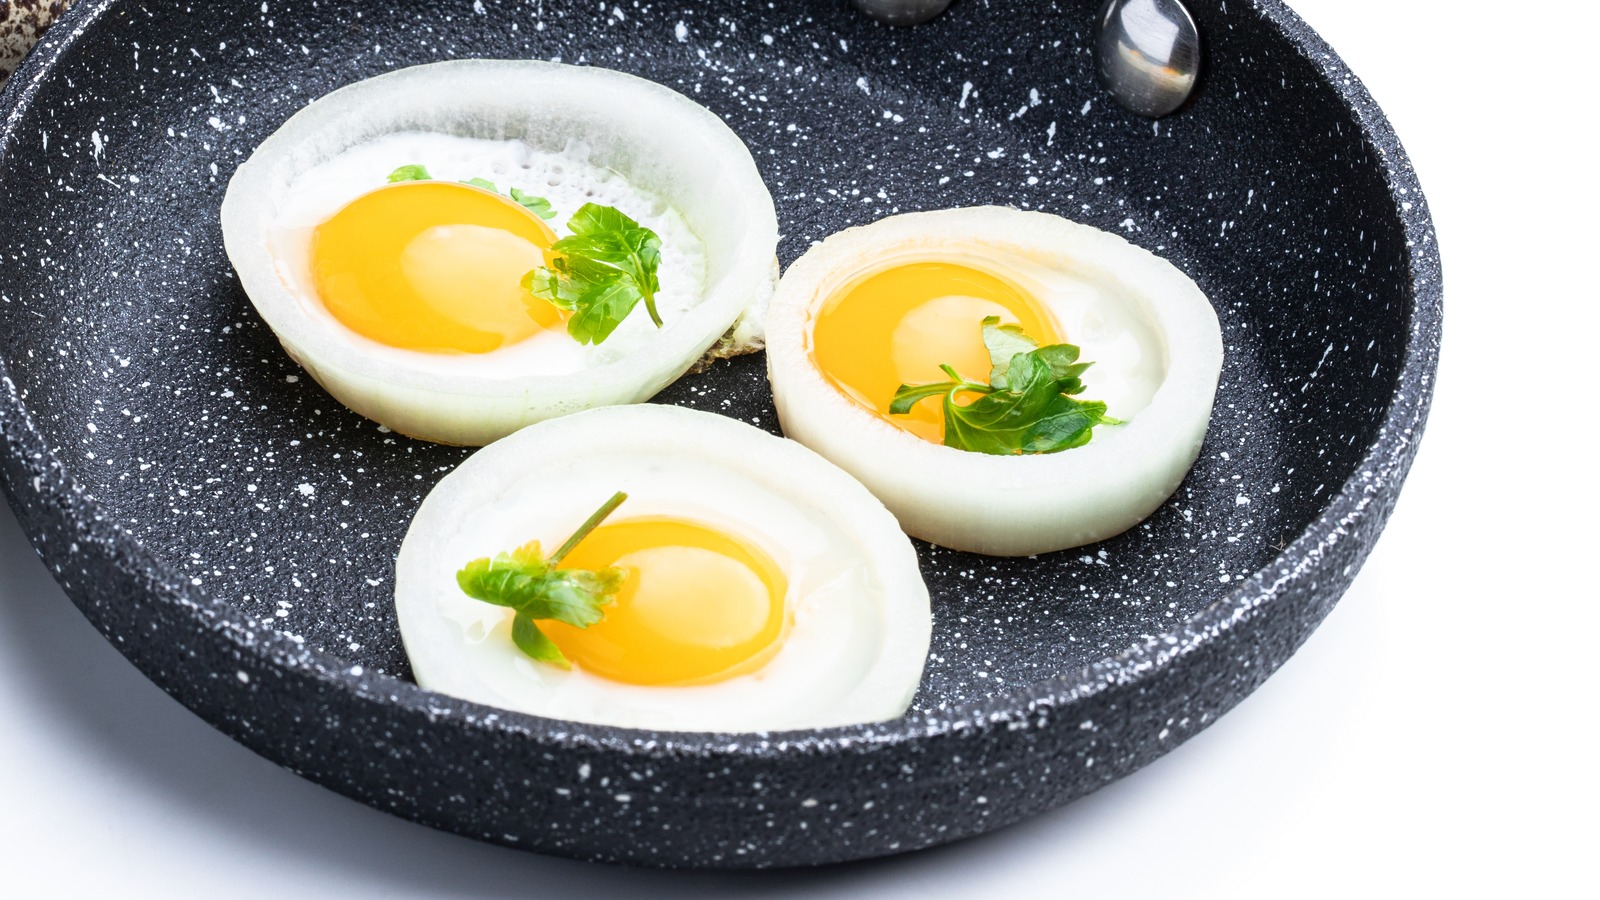 A quick way to cut hard boiled eggs! Put them in your onion